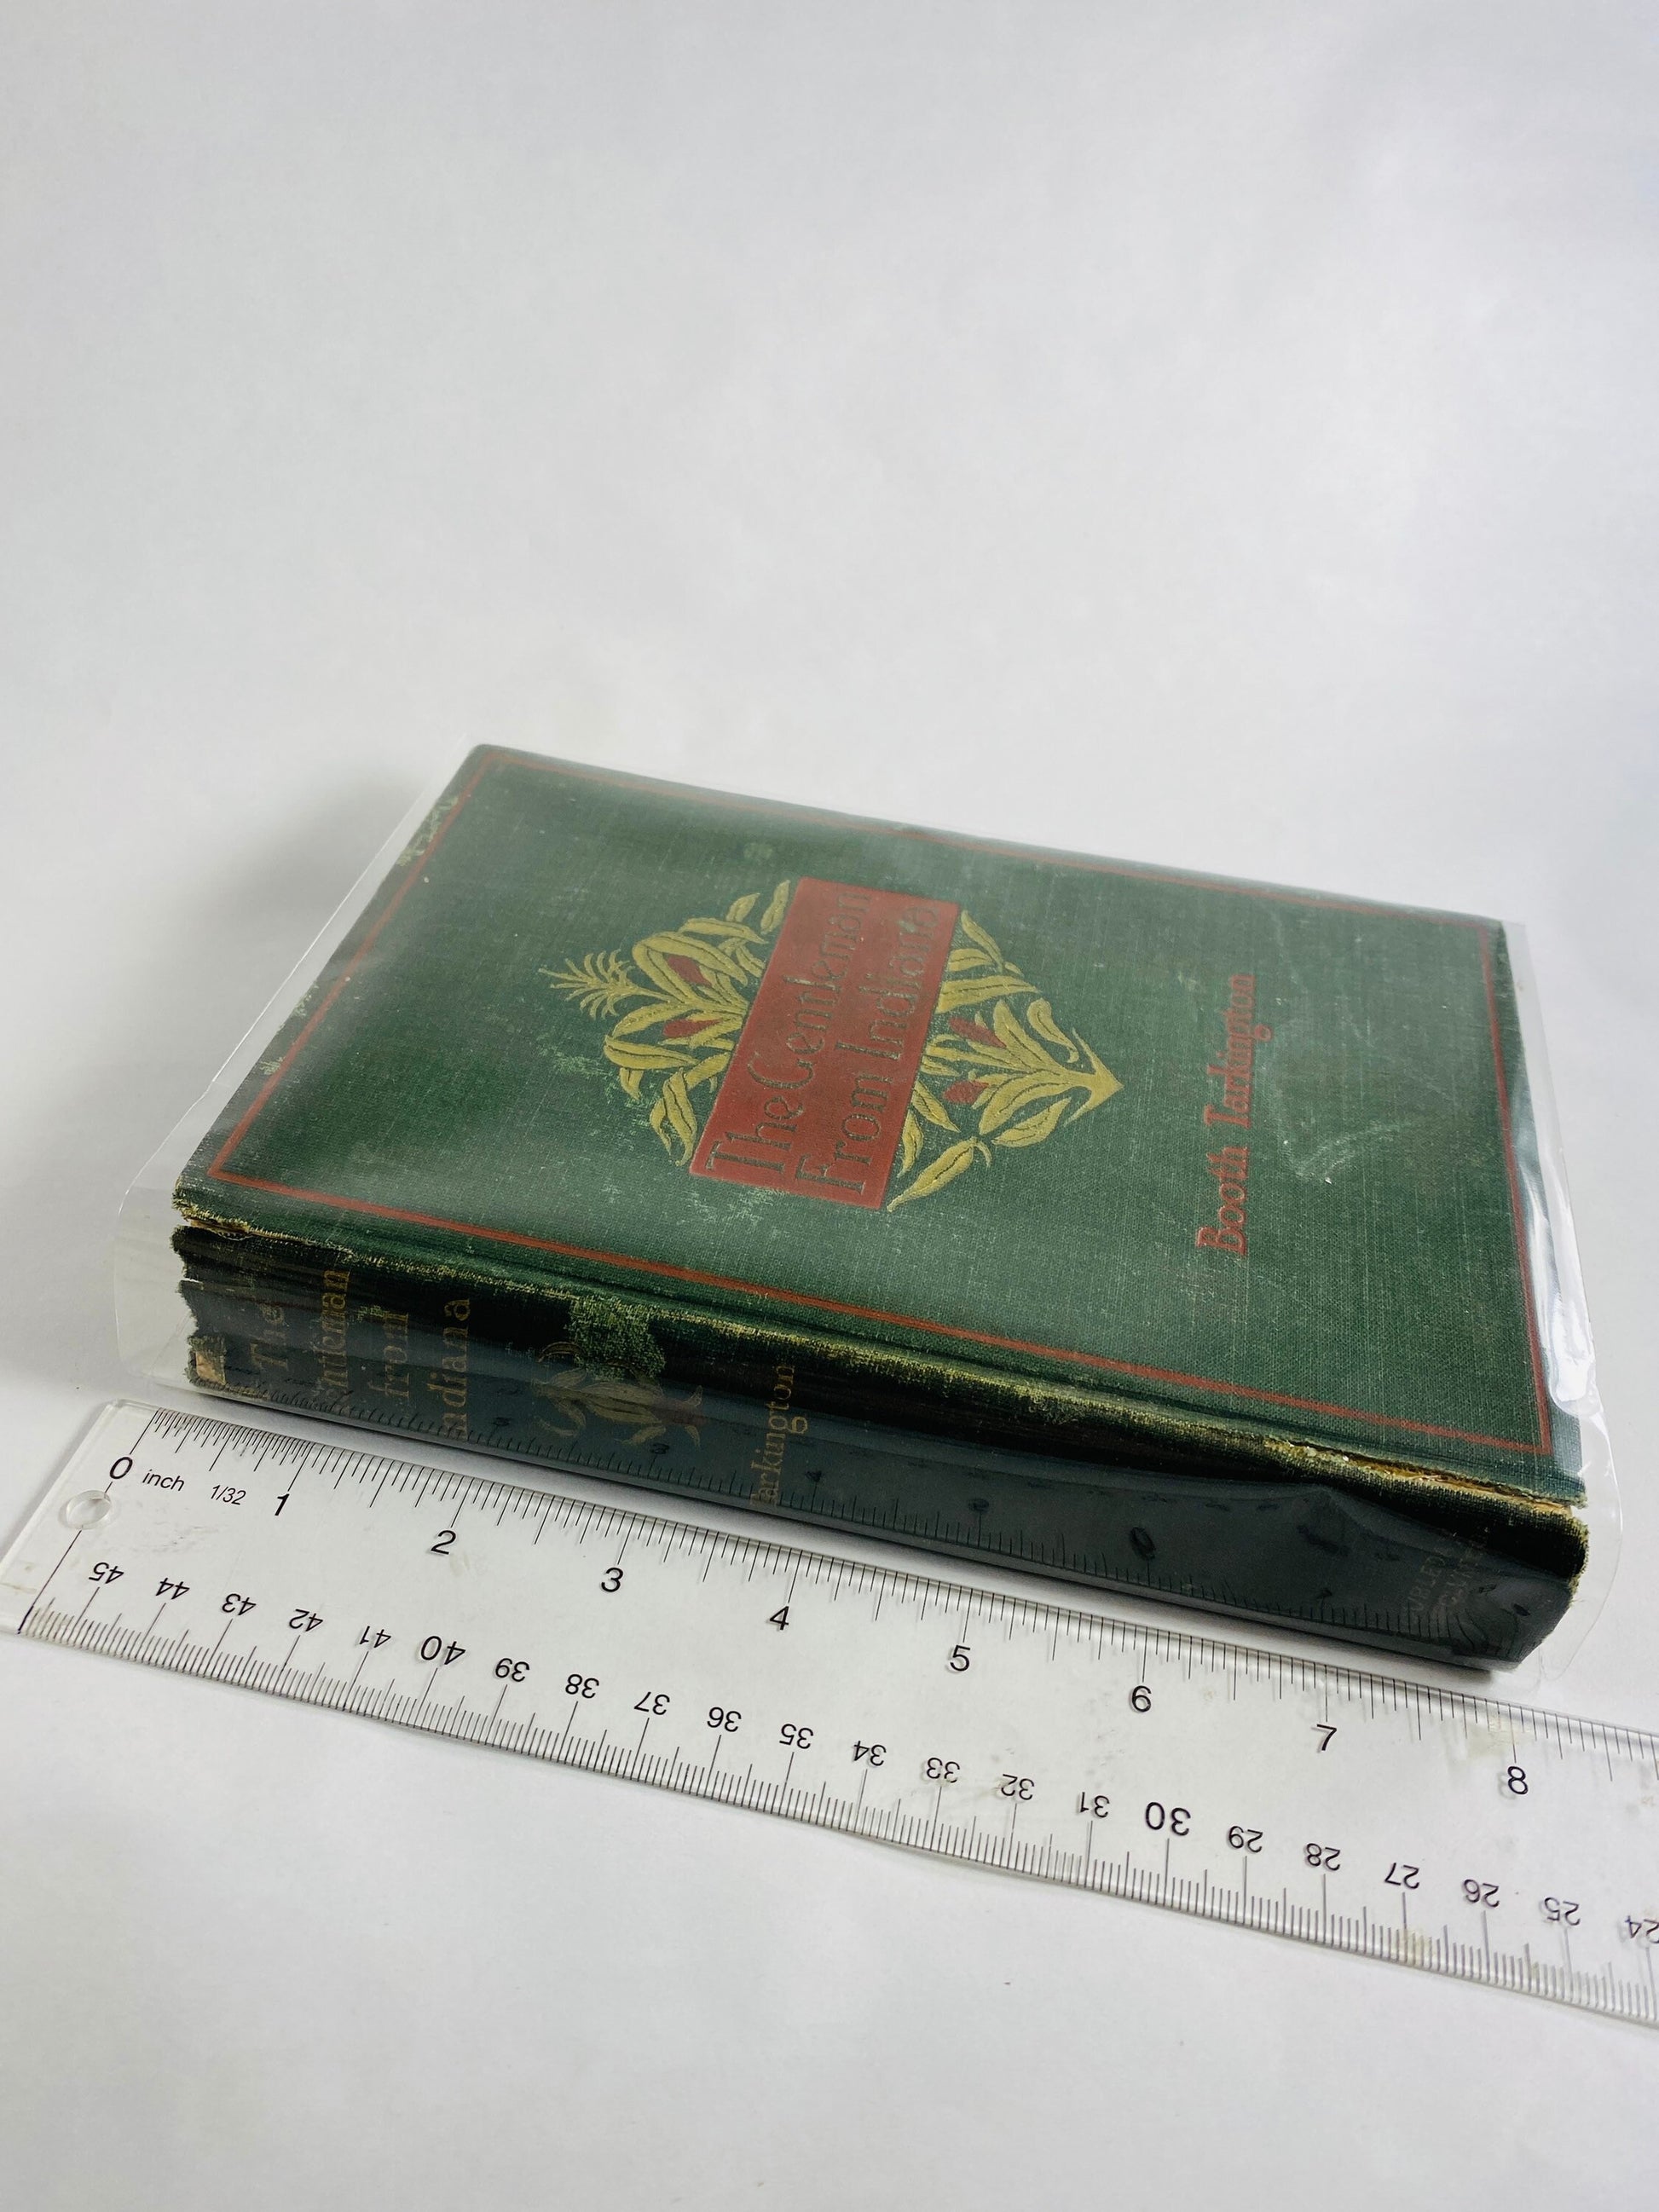 1899 Gentleman from Indiana by Booth Tarkington FIRST EDITION Vintage book about the Fight against political corruption. Green cloth boards